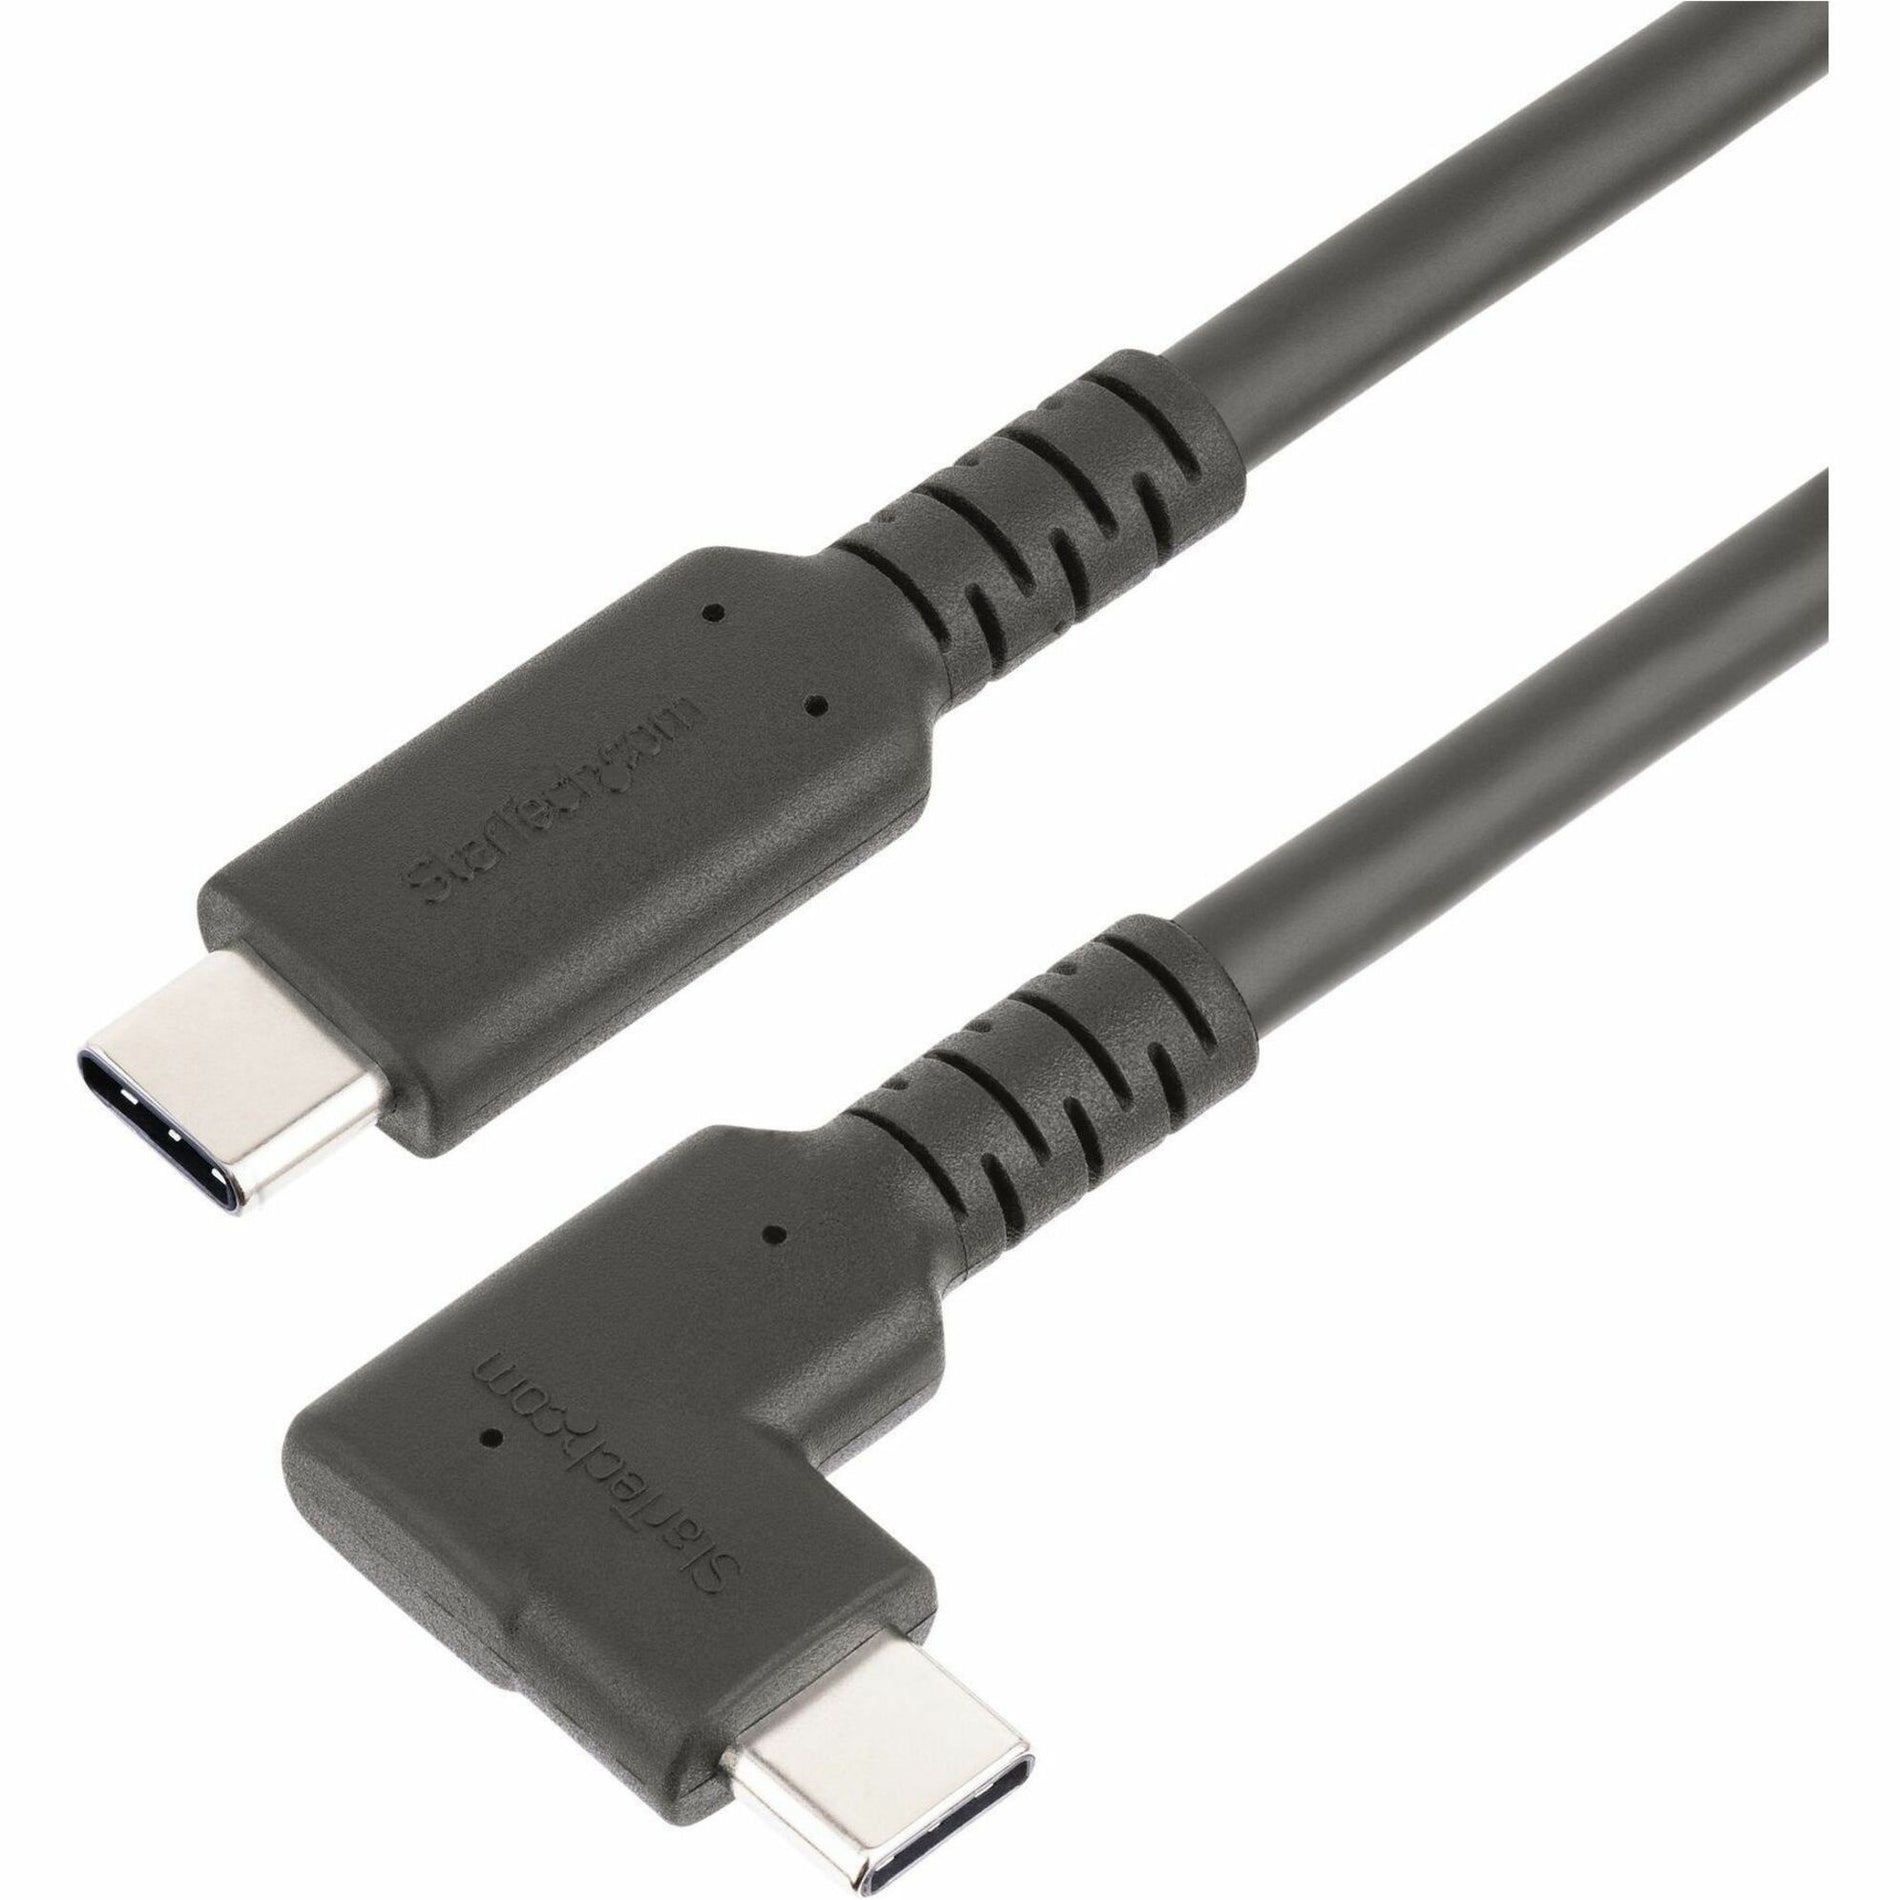 USB-C Data Transfer Cable - 3 ft, 10 Gbit/s, 90° Angled Connector (RUSB31CC1MBR)